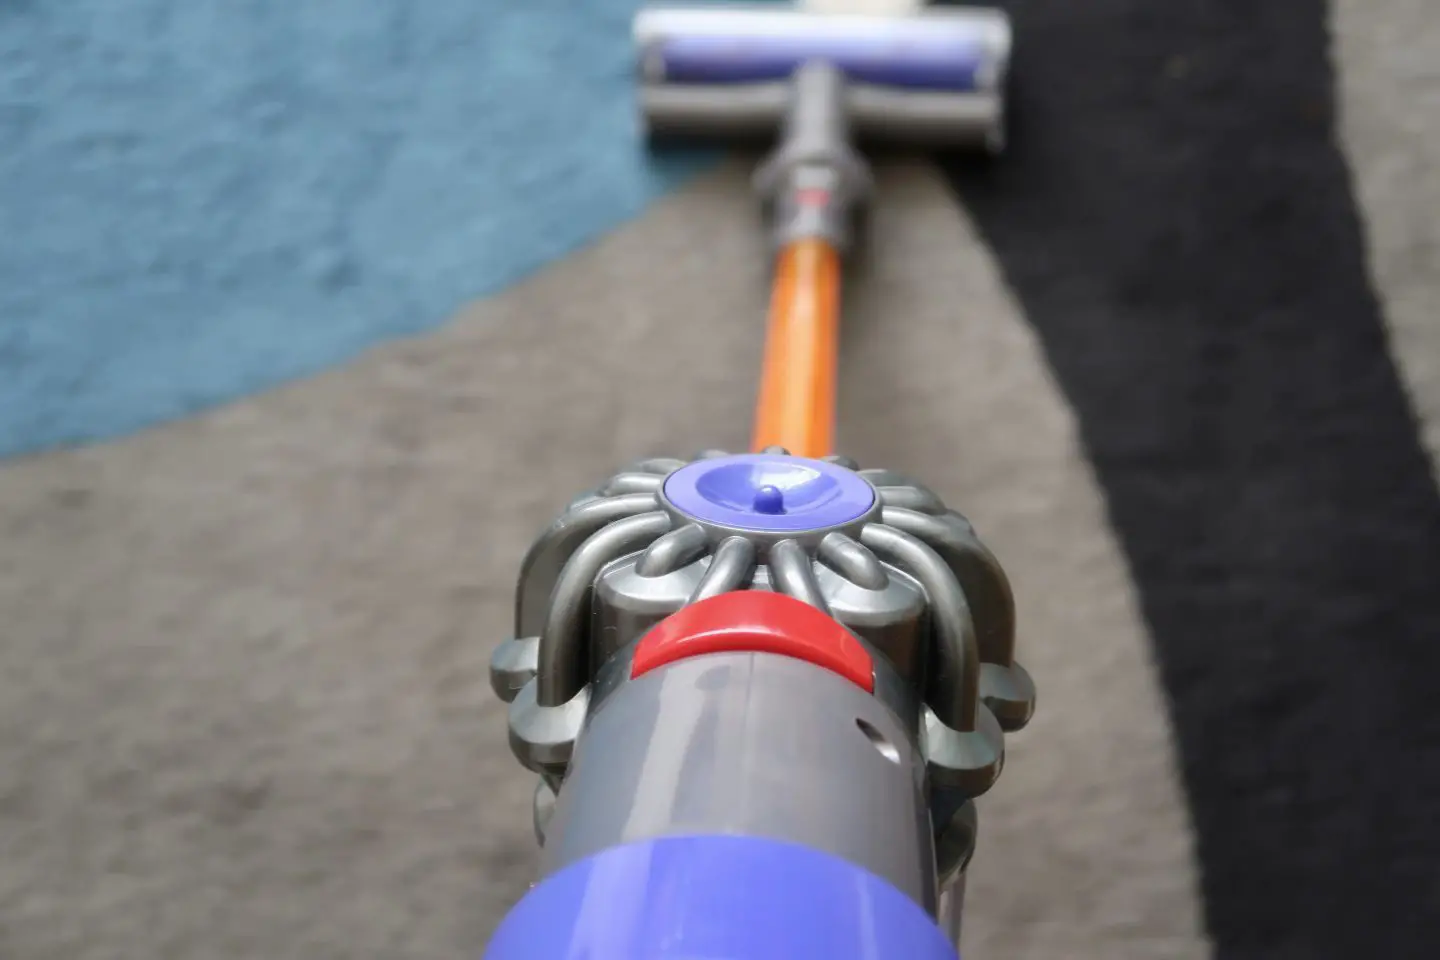 A top down view of a child's vacuum cleaner